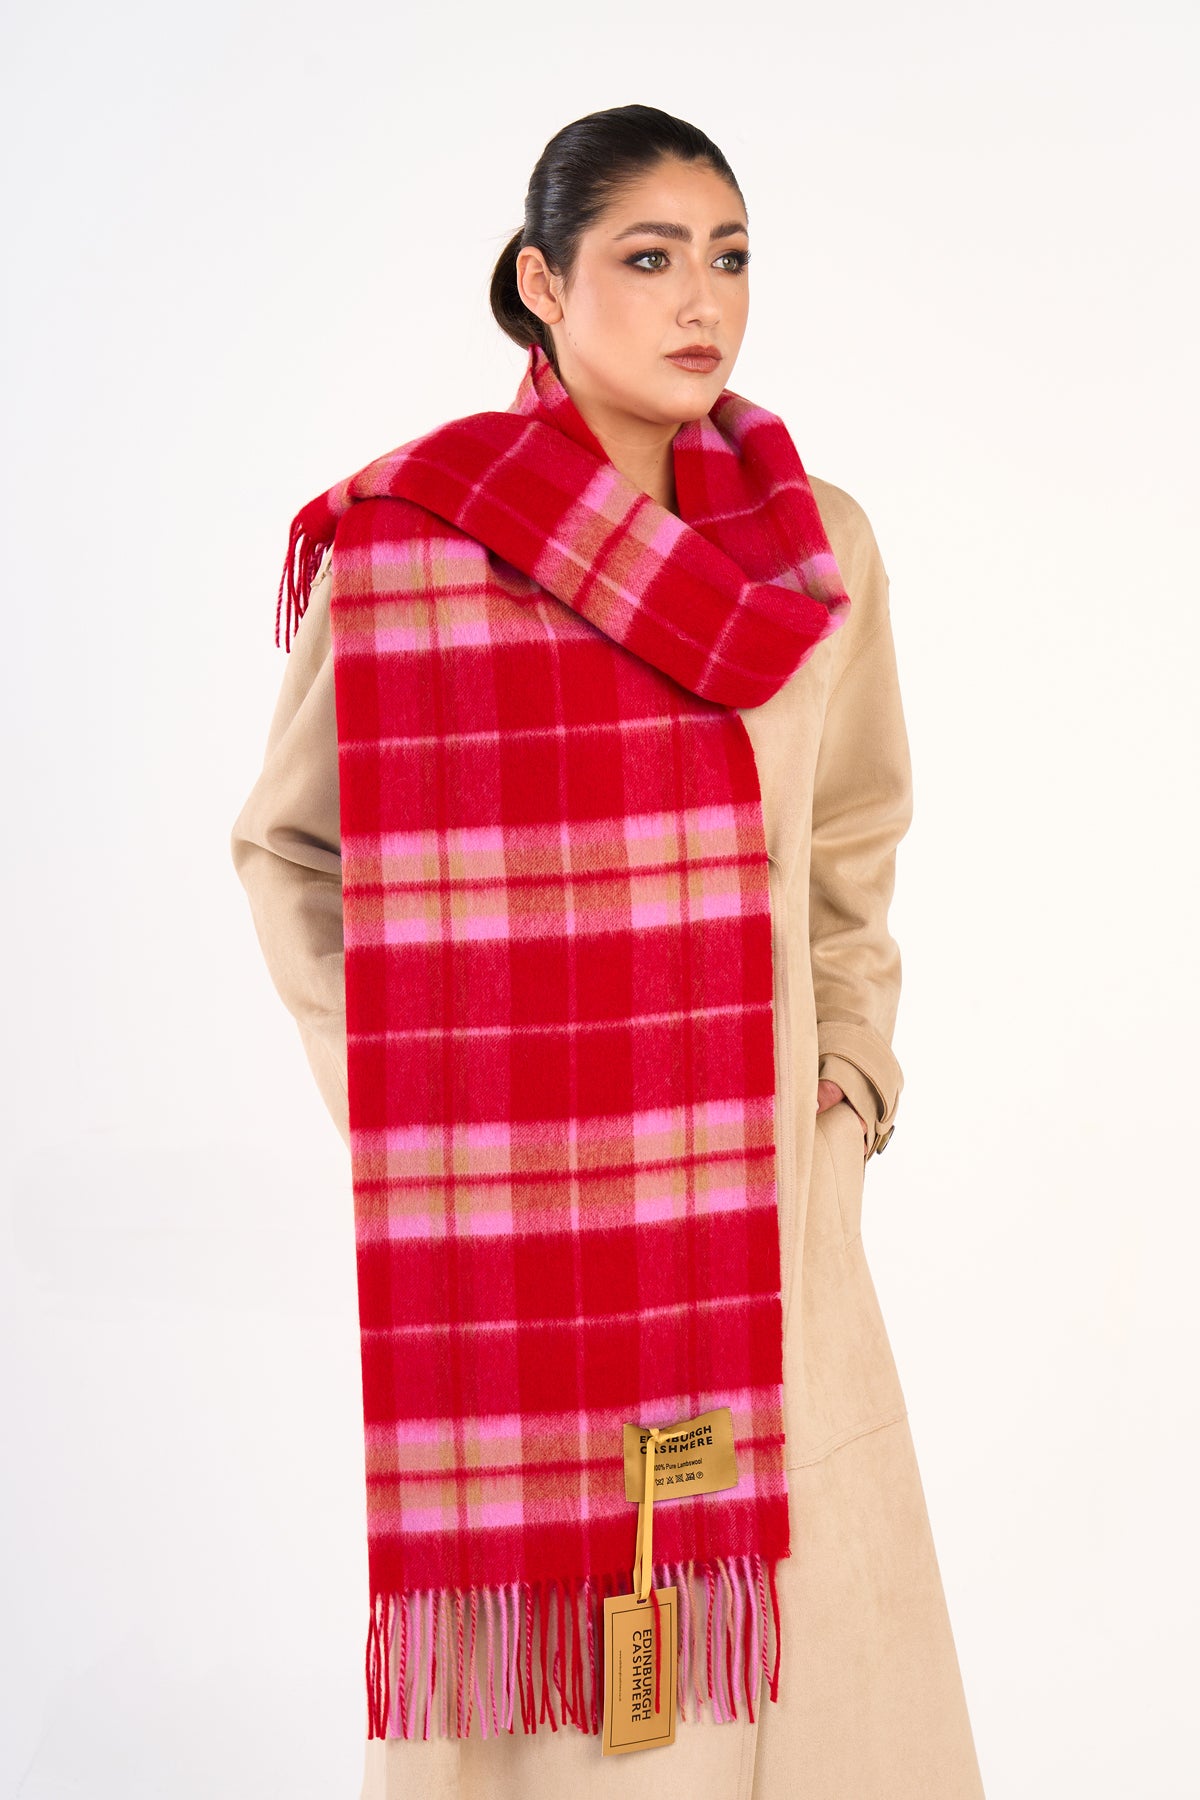 100% Pure Lambswool Oversized Scarf/Wrap Thomson Blue/Red 33